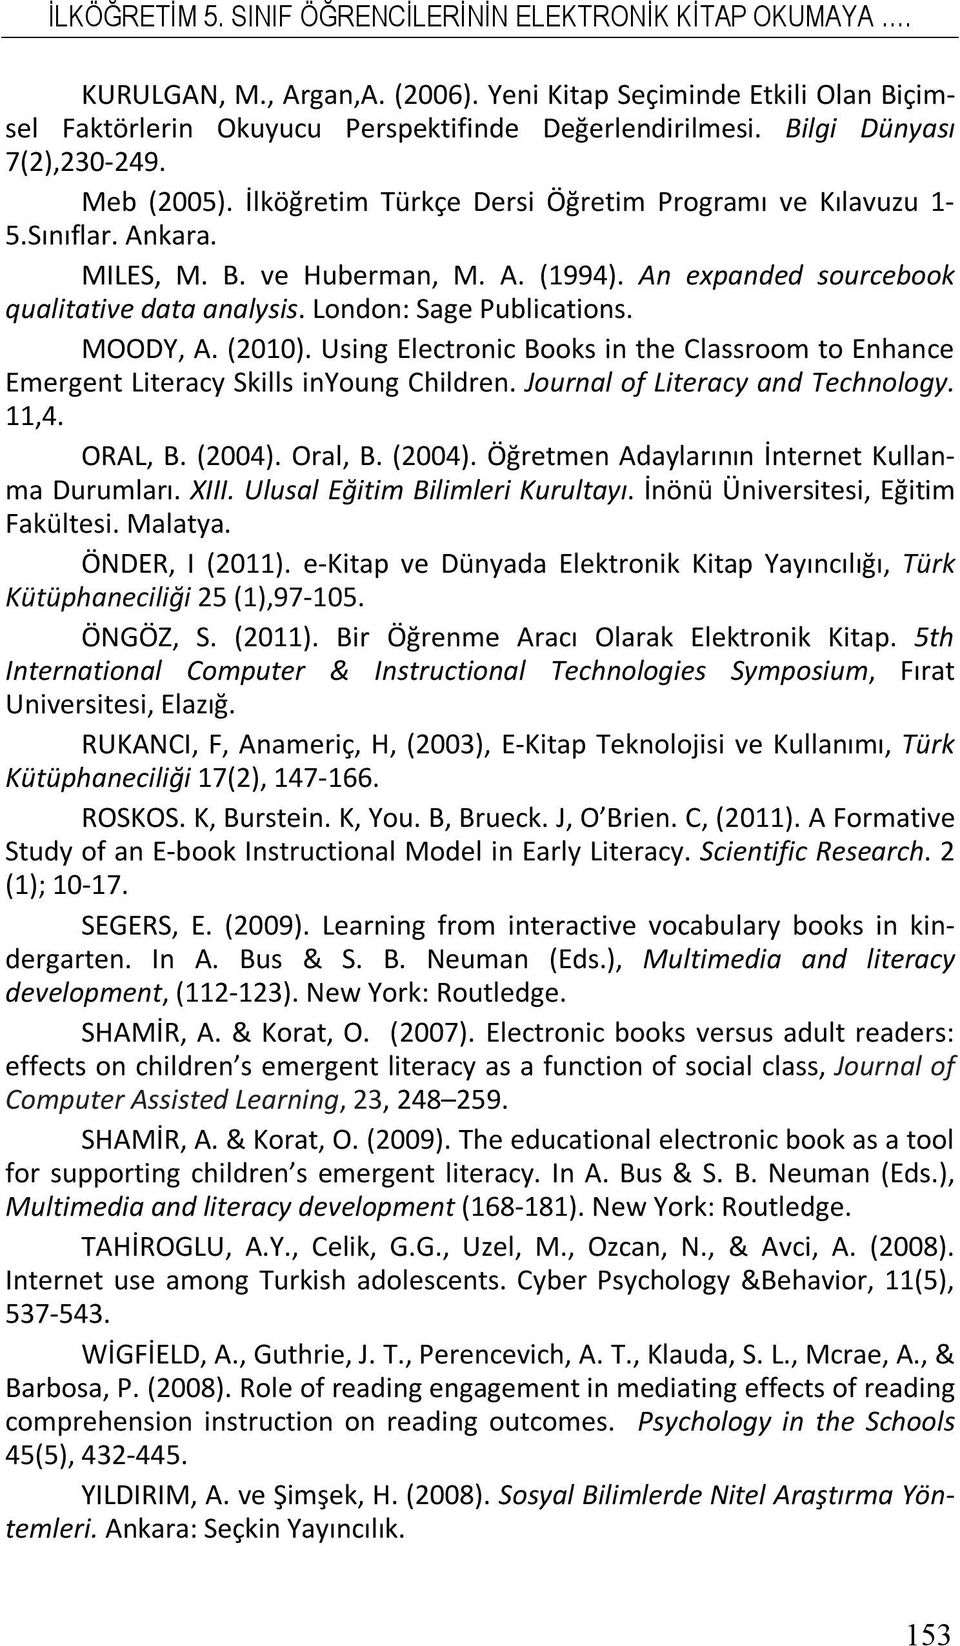 (2010). Using Electronic Books in the Classroom to Enhance Emergent Literacy Skills inyoung Children. Journal o Literacy and Technology. 11,4. ORAL, B. (2004).